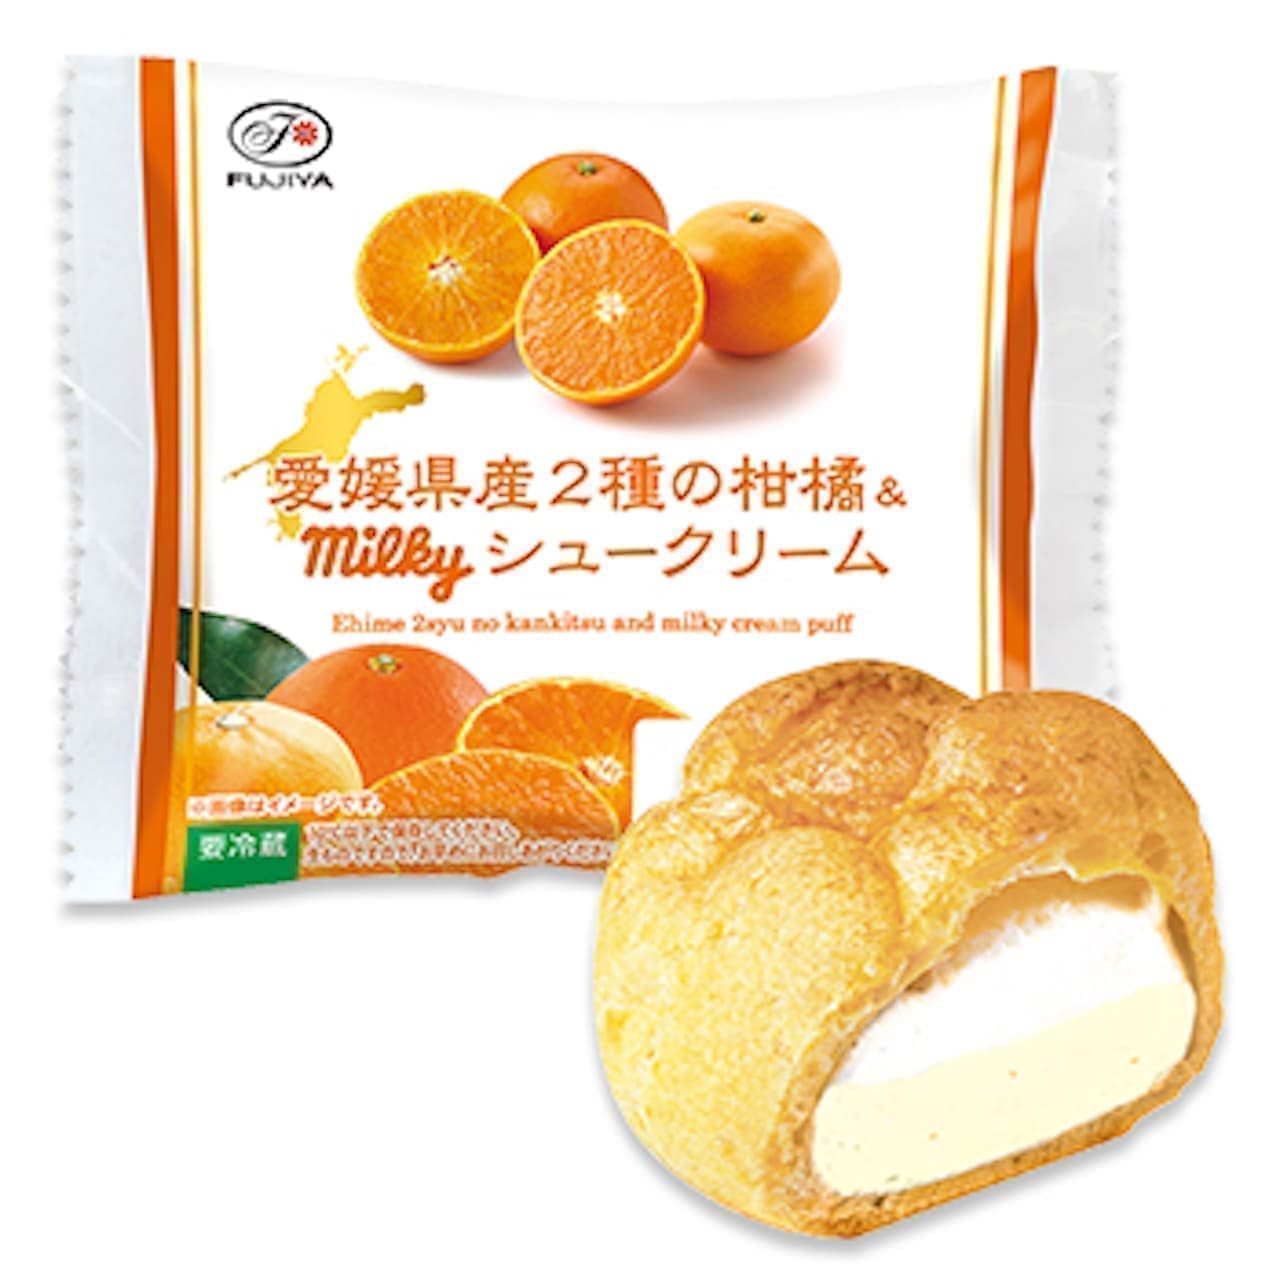 Fujiya "Two Kinds of Citrus & Milky Cream Puffs from Ehime".